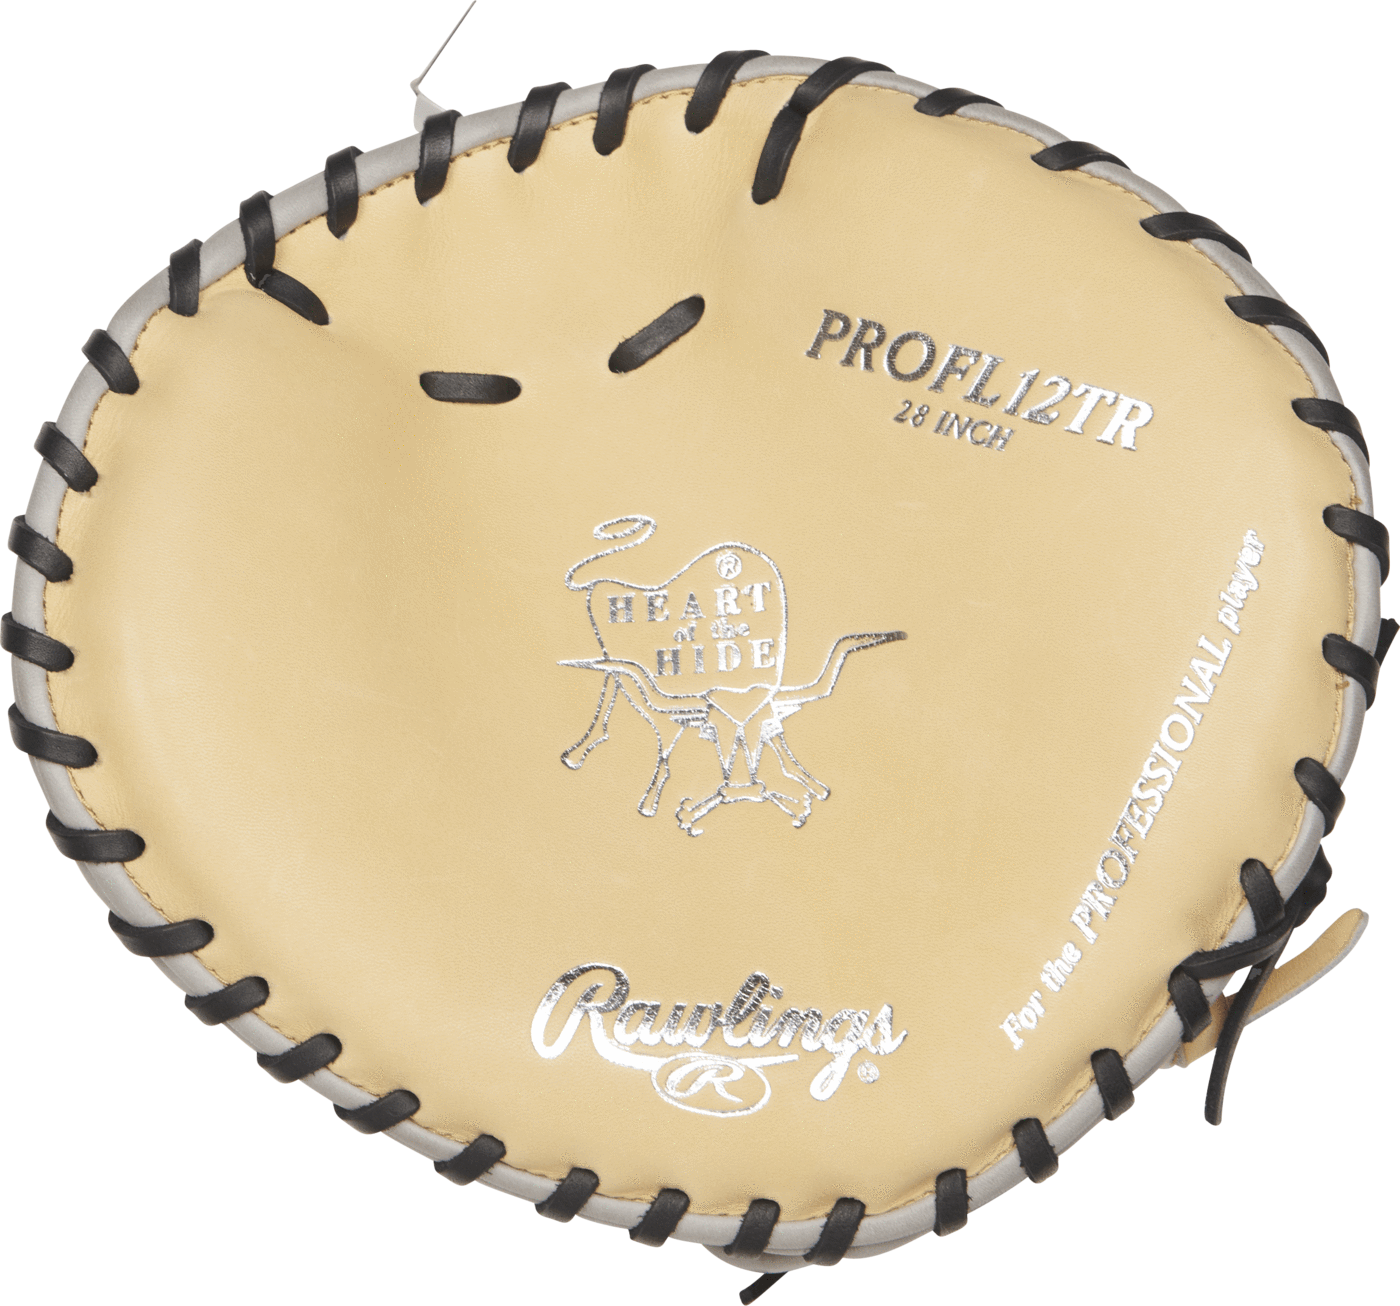 A Baseball Glove With A Logo On It